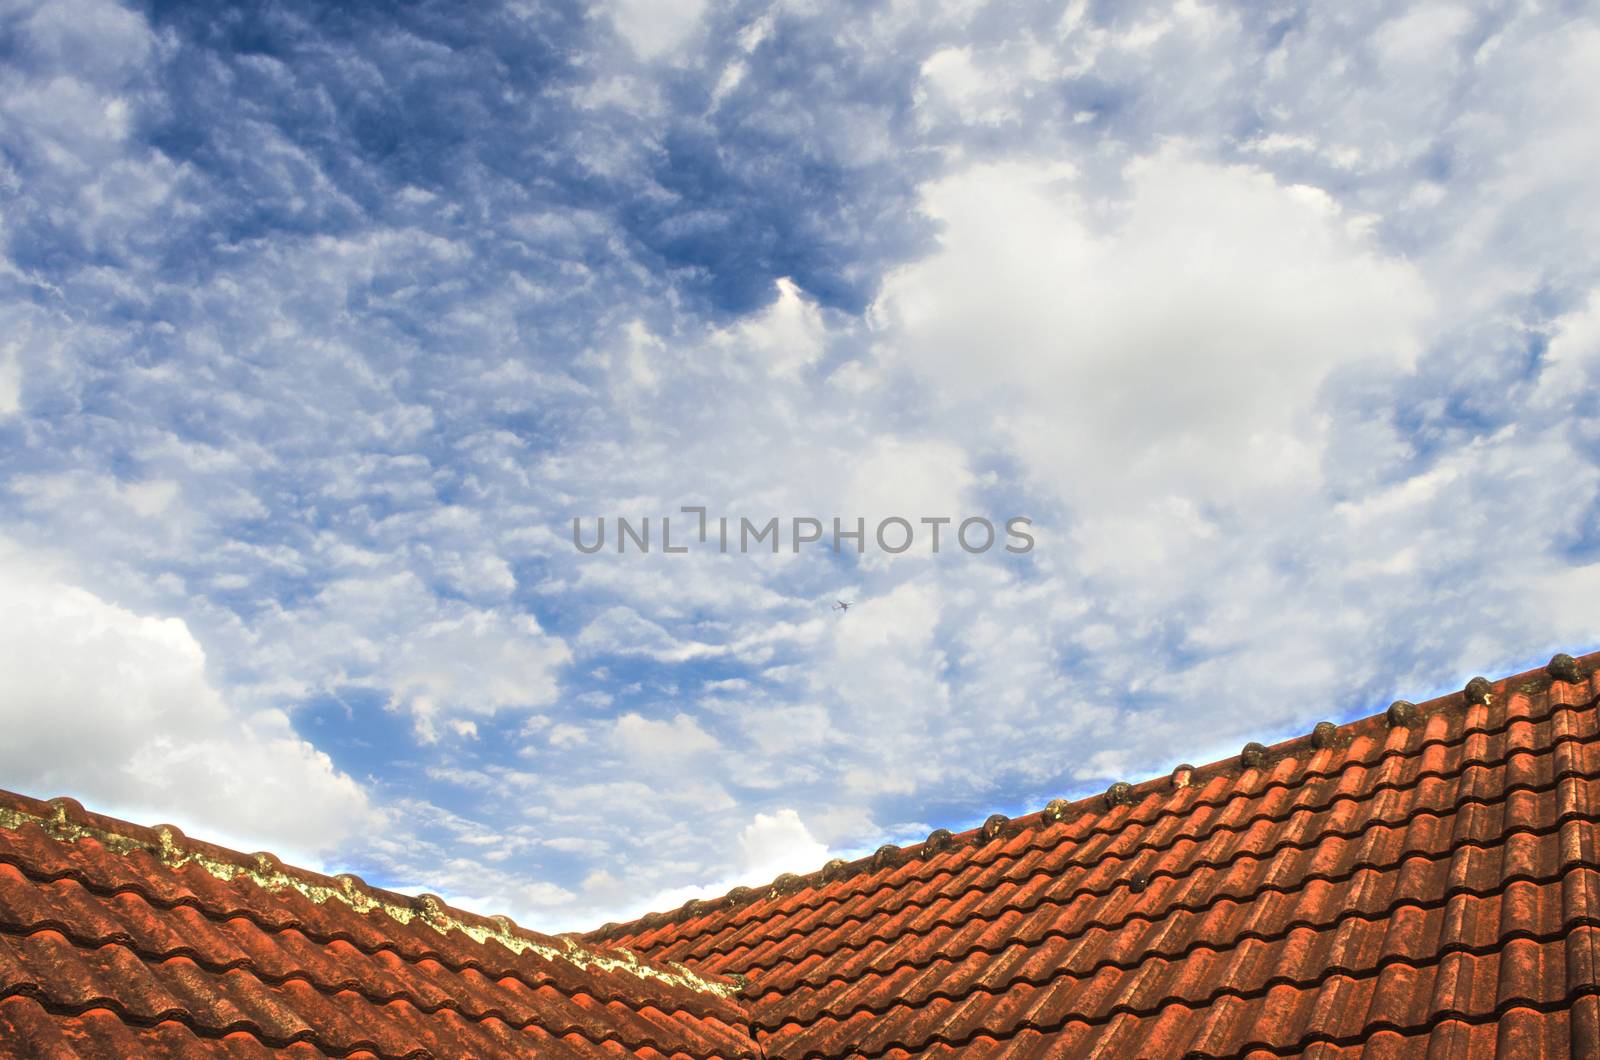 Tiled Roof with Fluffy Cloud Blue Sky by kobfujar